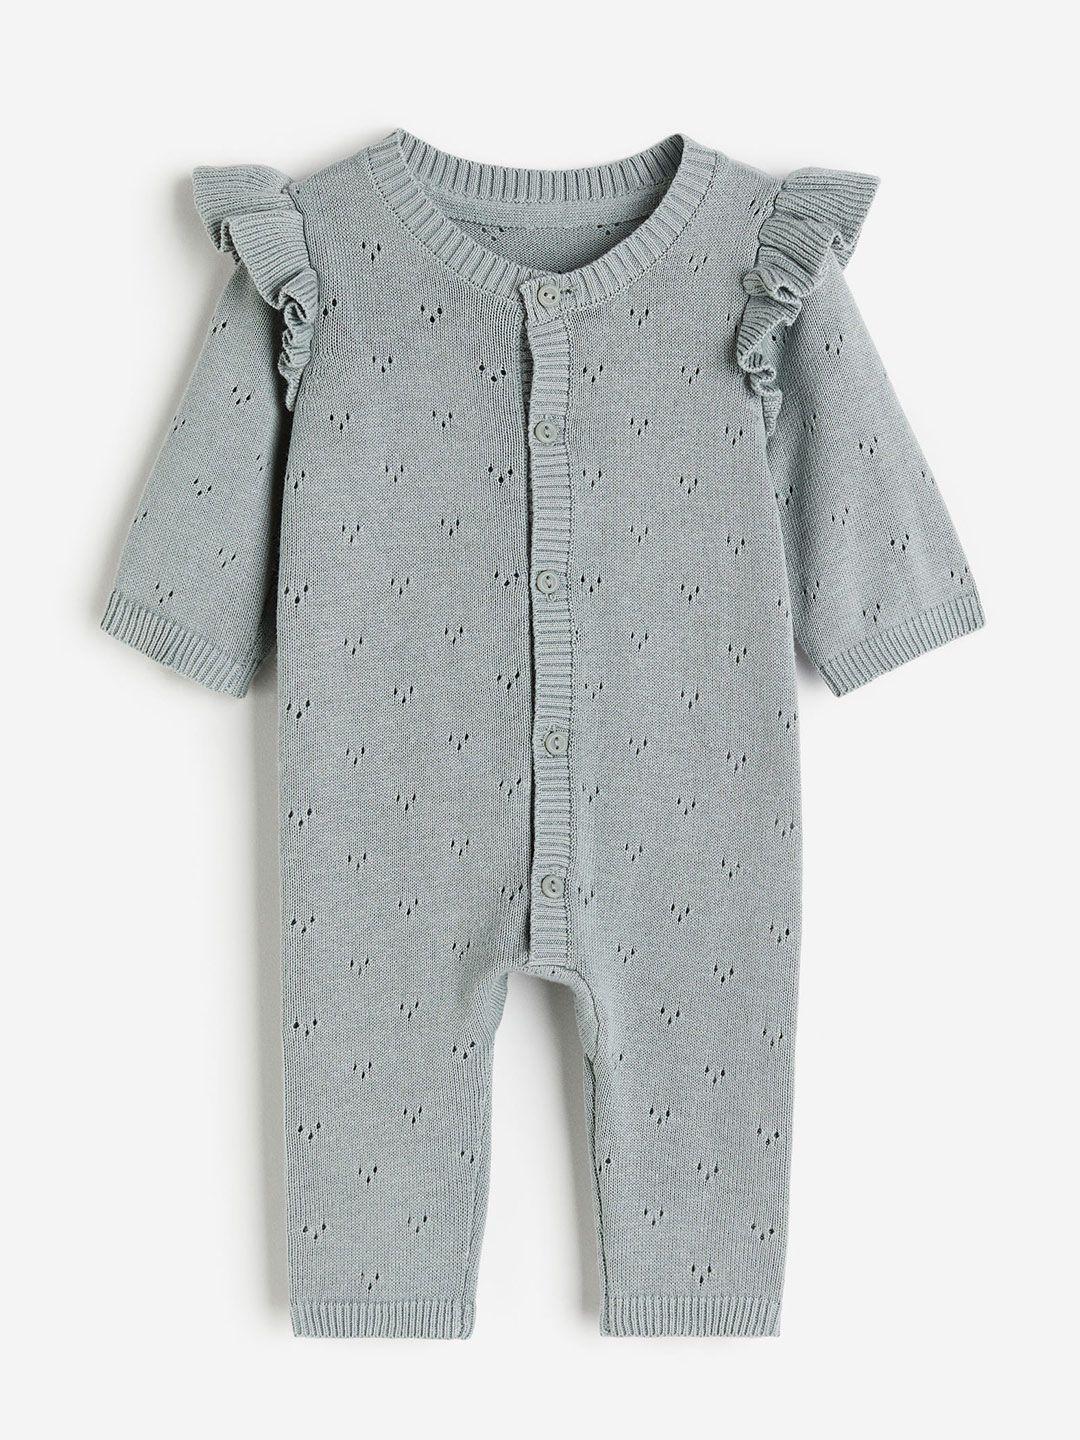 h&m-boys-knitted-cotton-romper-suit